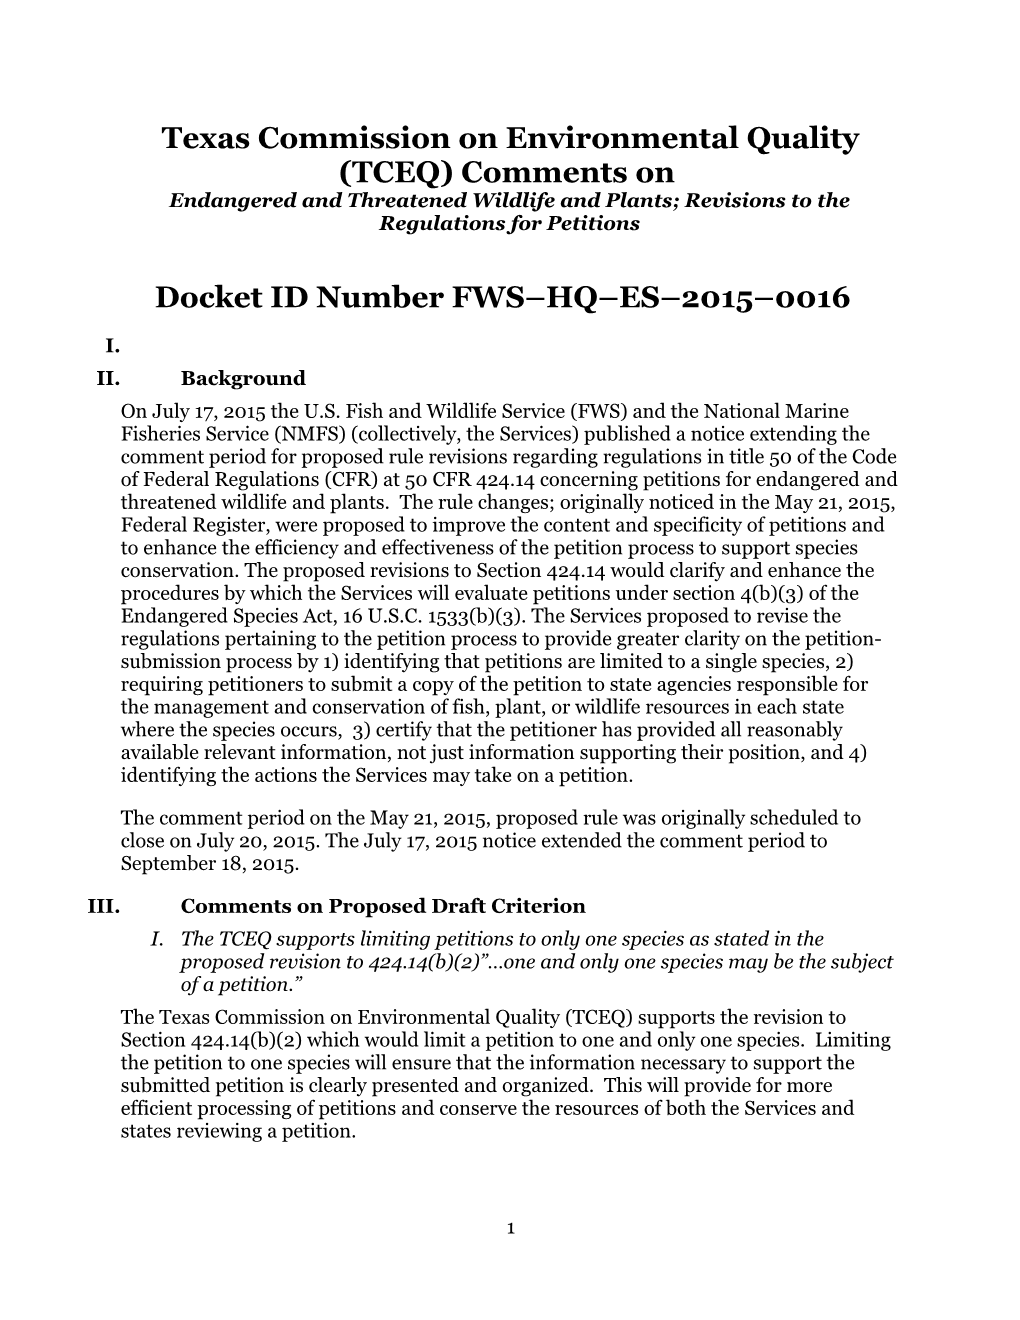 Texas Commission on Environmental Quality (TCEQ) Comments On